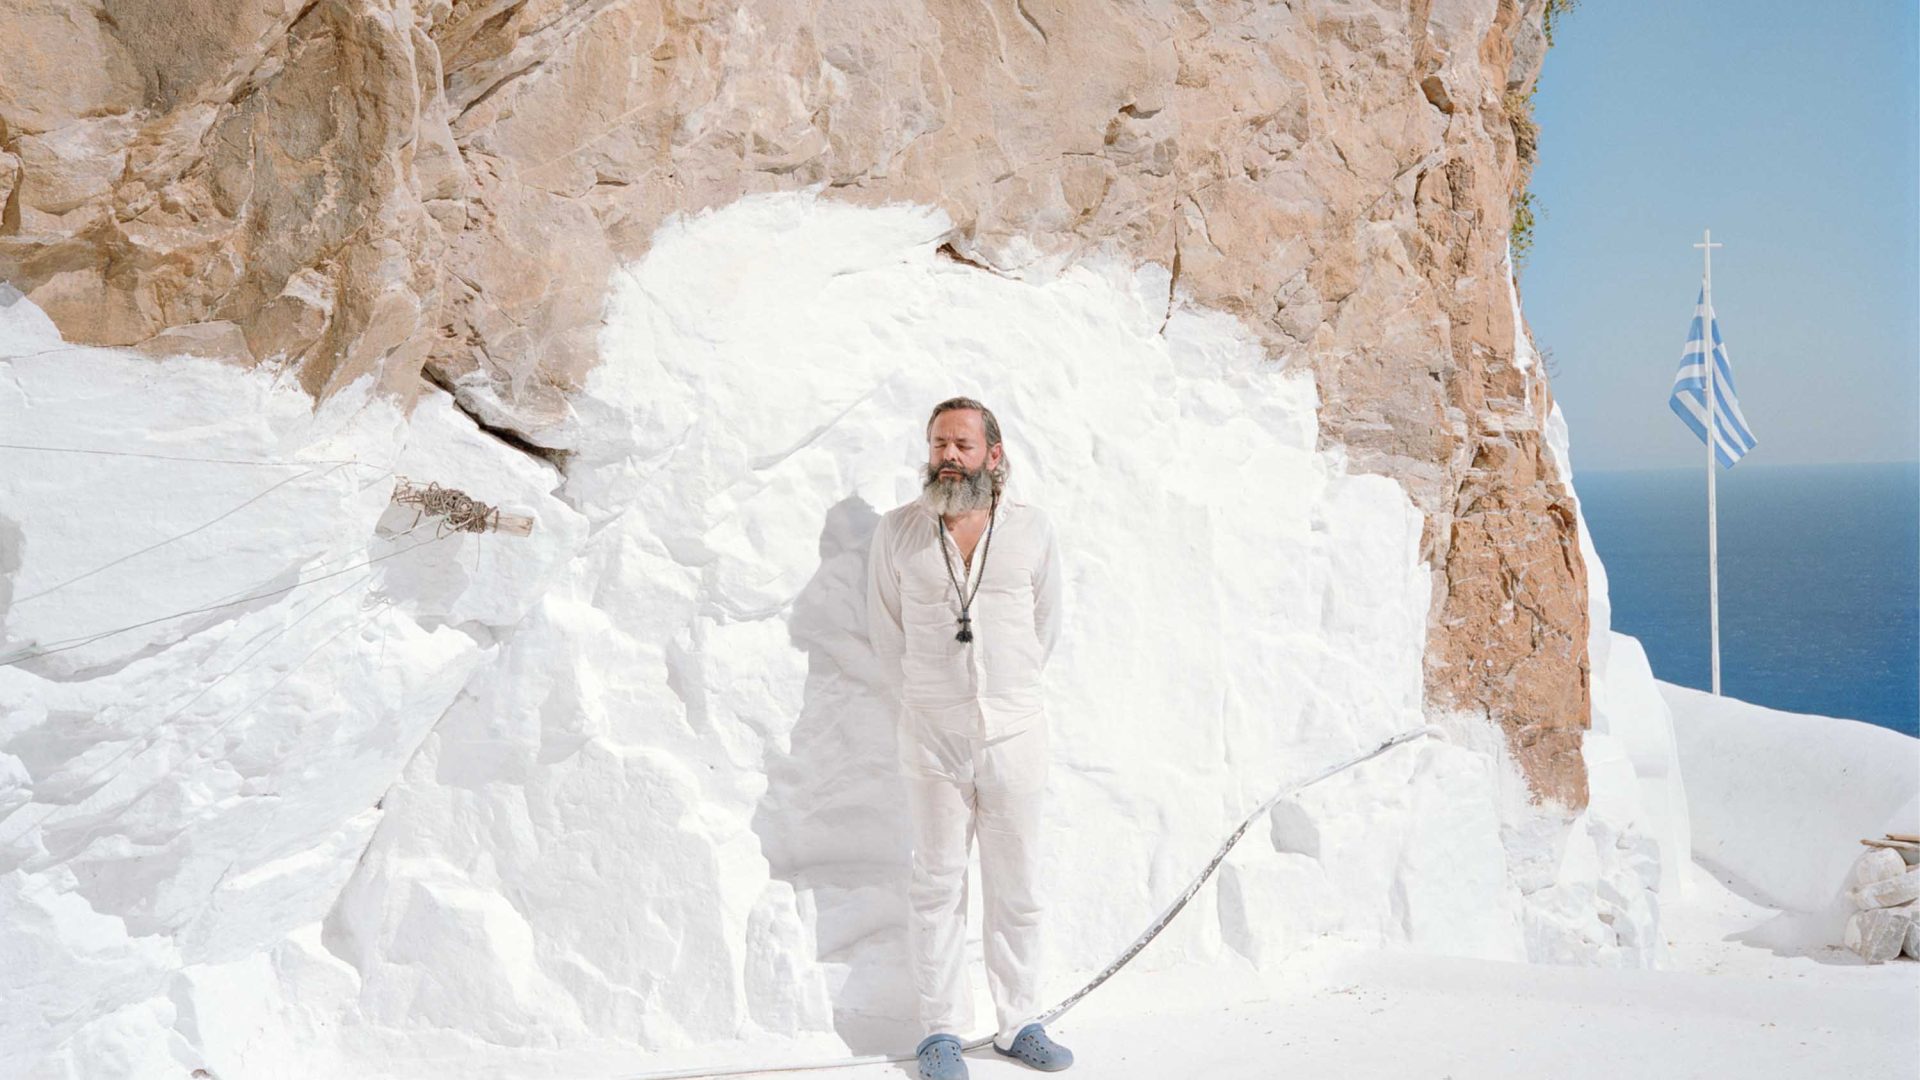 A man in white against a painted white rock face.